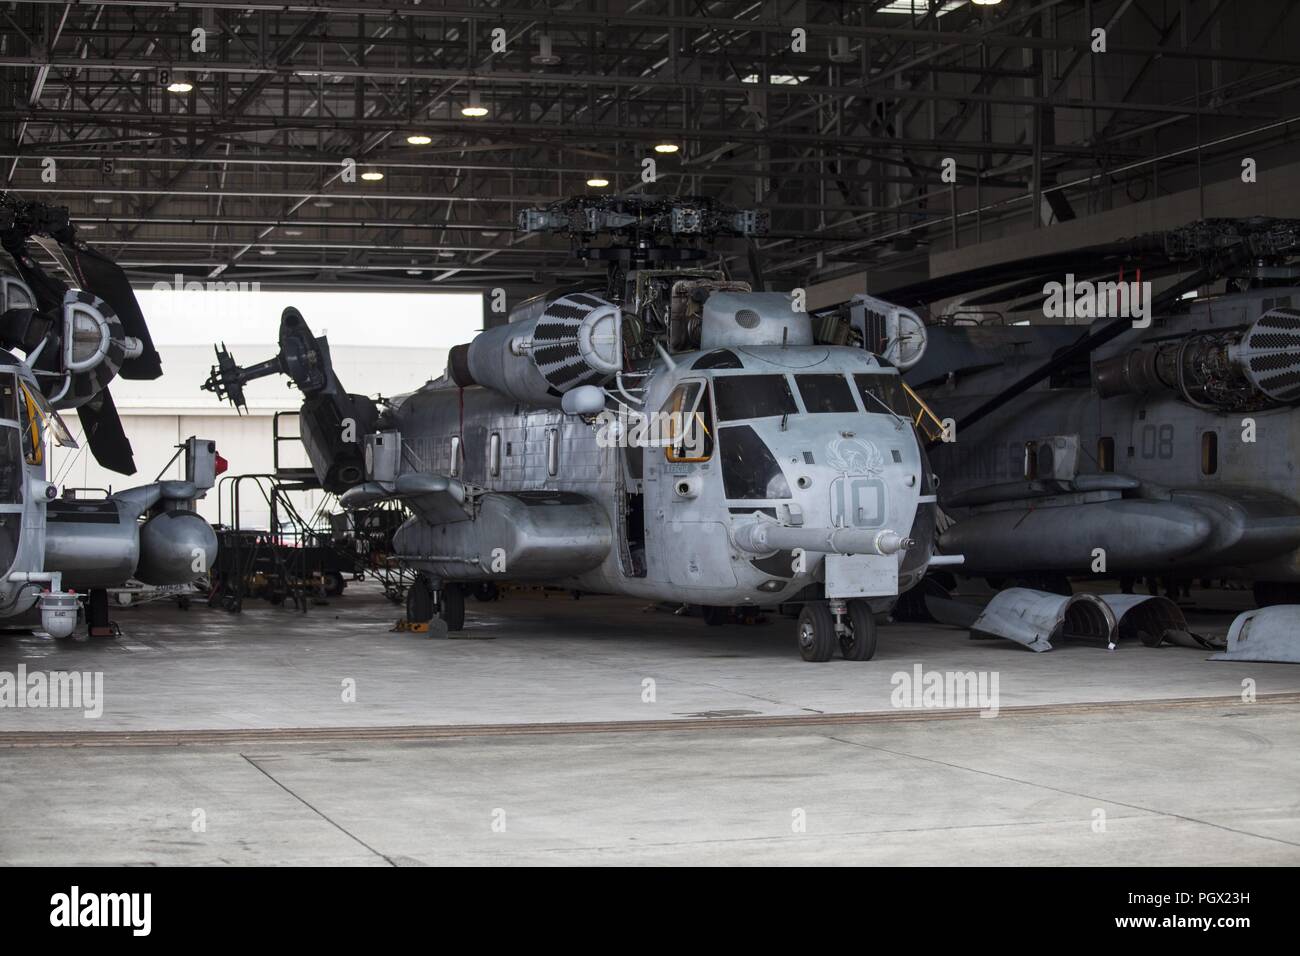 Secured CH-53E Super Stallion helicopters prepared for the Hurricane Lane's arrival at Marine Corps Air Station (MCAS) Kaneohe Bay, Hawaii, August 22, 2018. Image courtesy Sgt. Jesus Sepulveda Torres / Marine Corps Base Hawaii. () Stock Photo